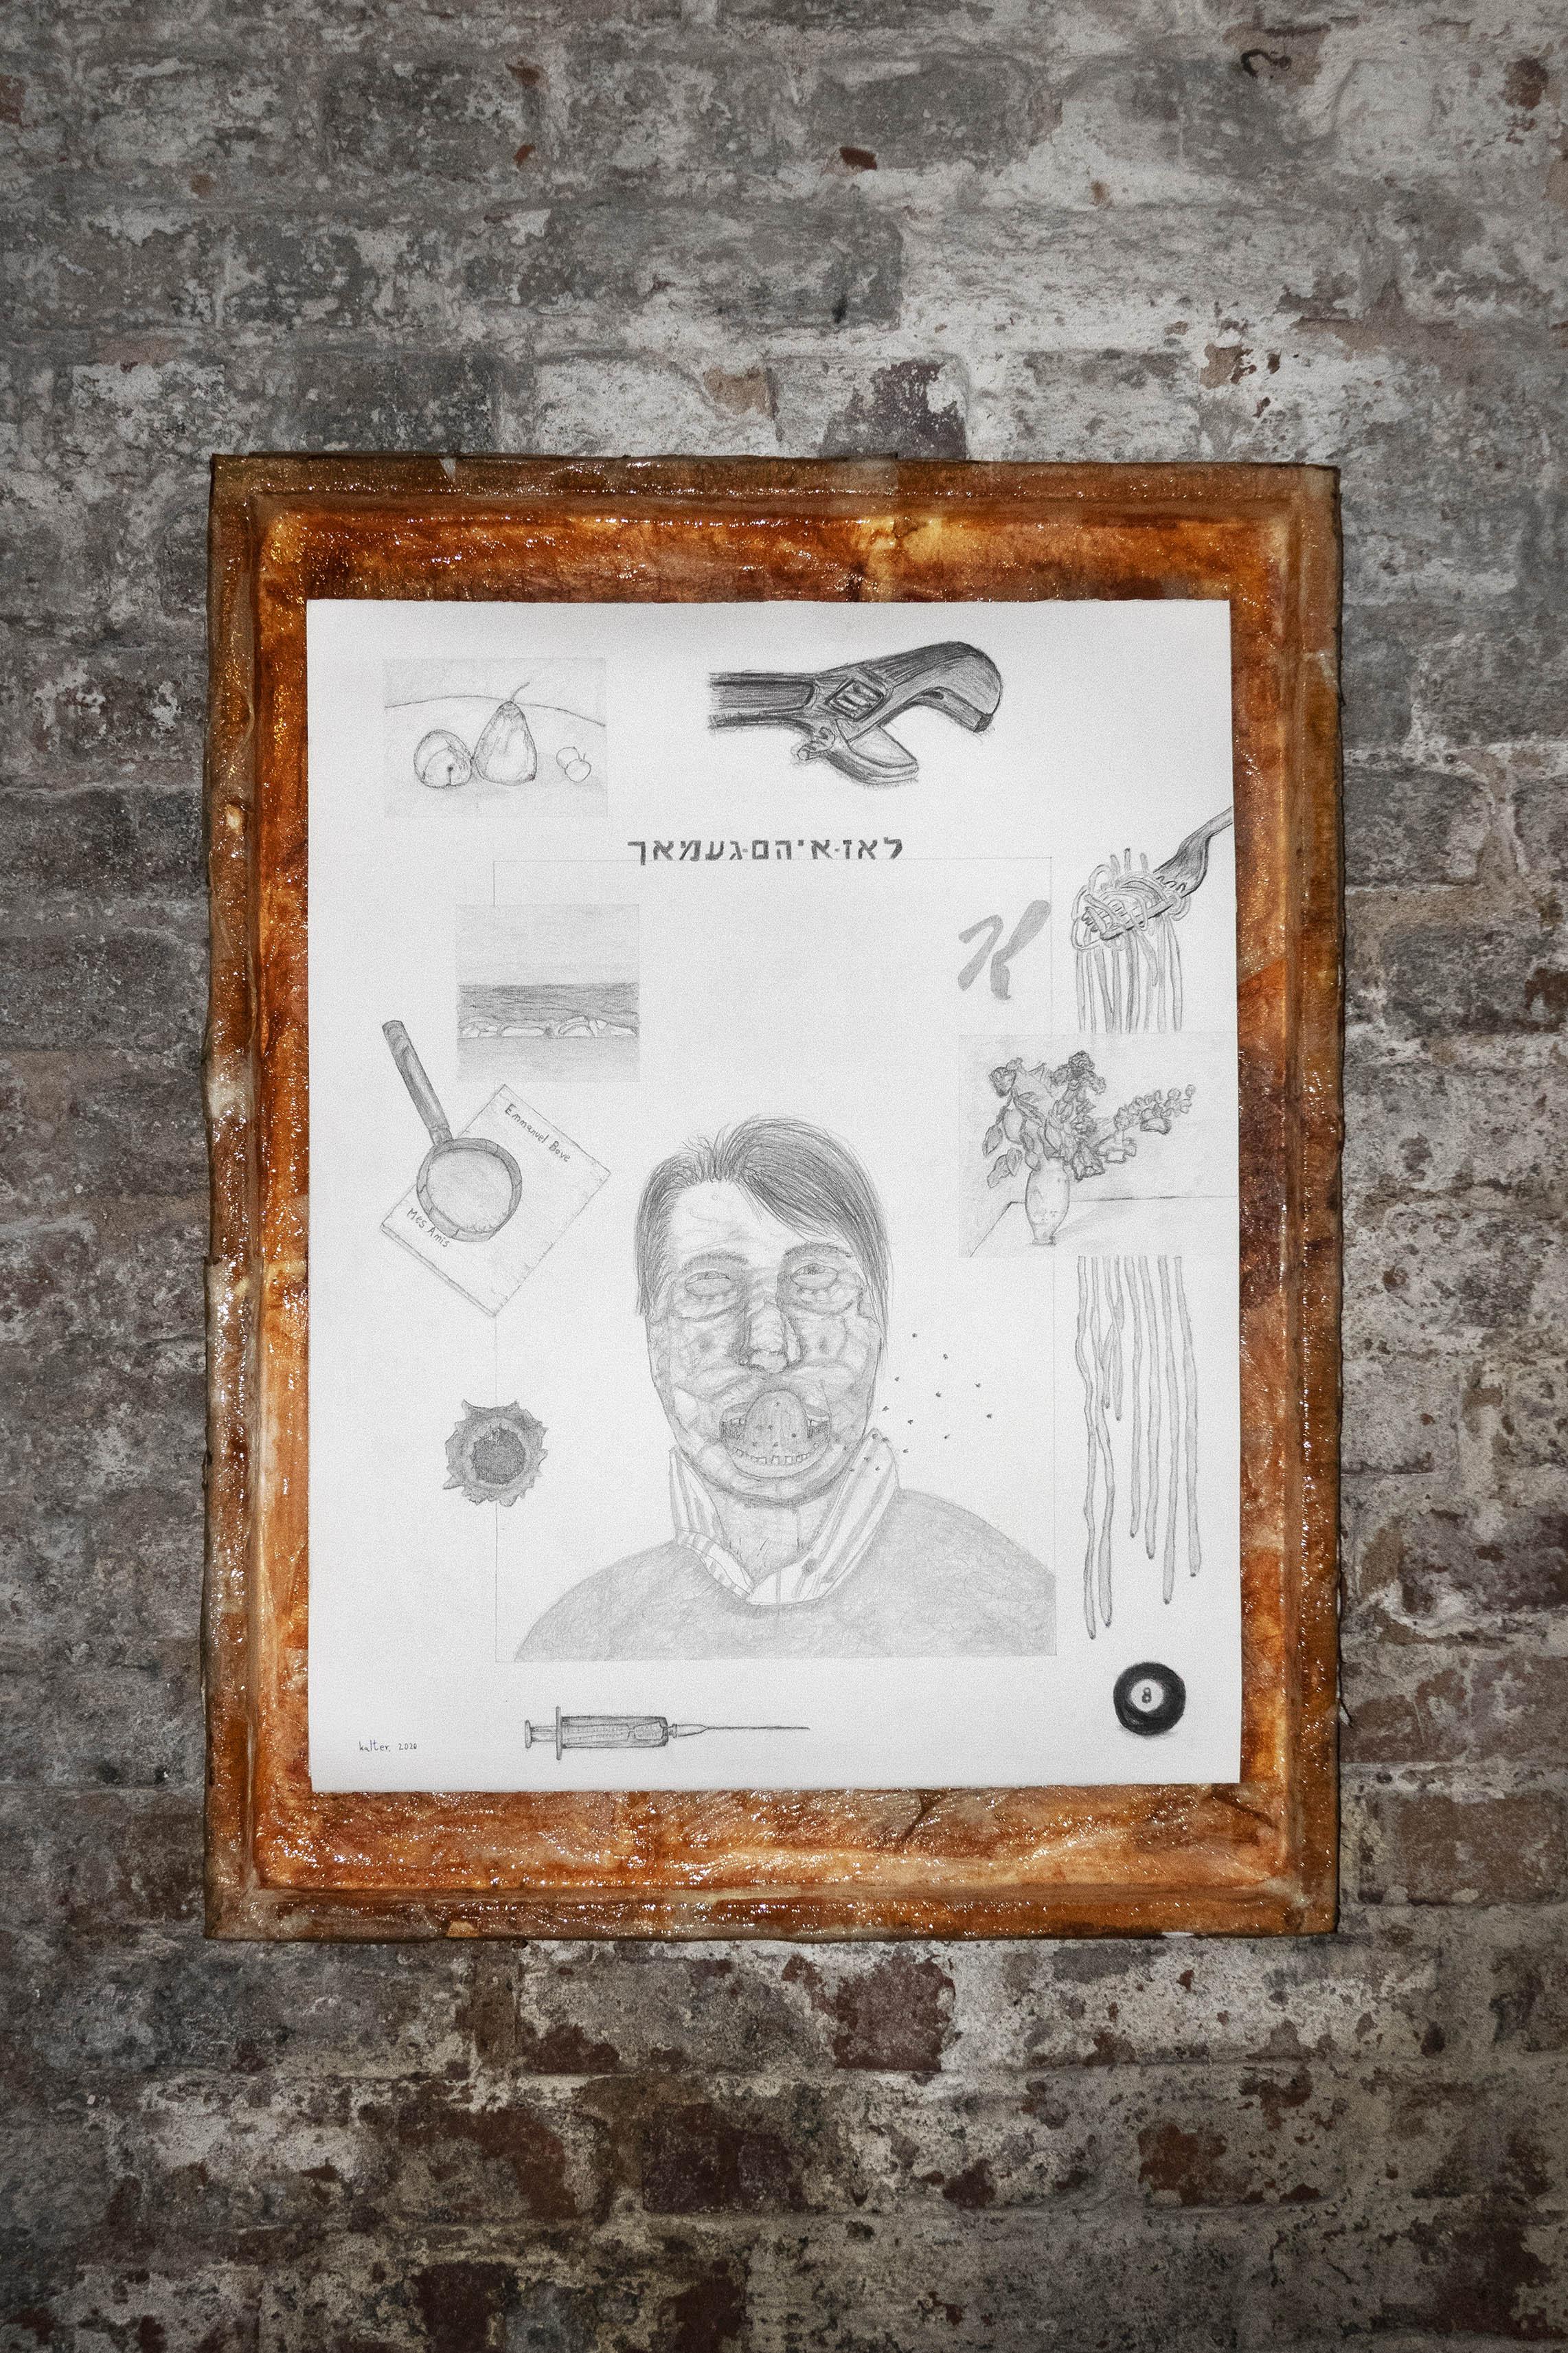 I. S. Kalter, "Leave Him Alone", 2020â€“22. Pencil and graphite on paper, artist frame, 65x50 cm (with frame, 80x60x4 cm)